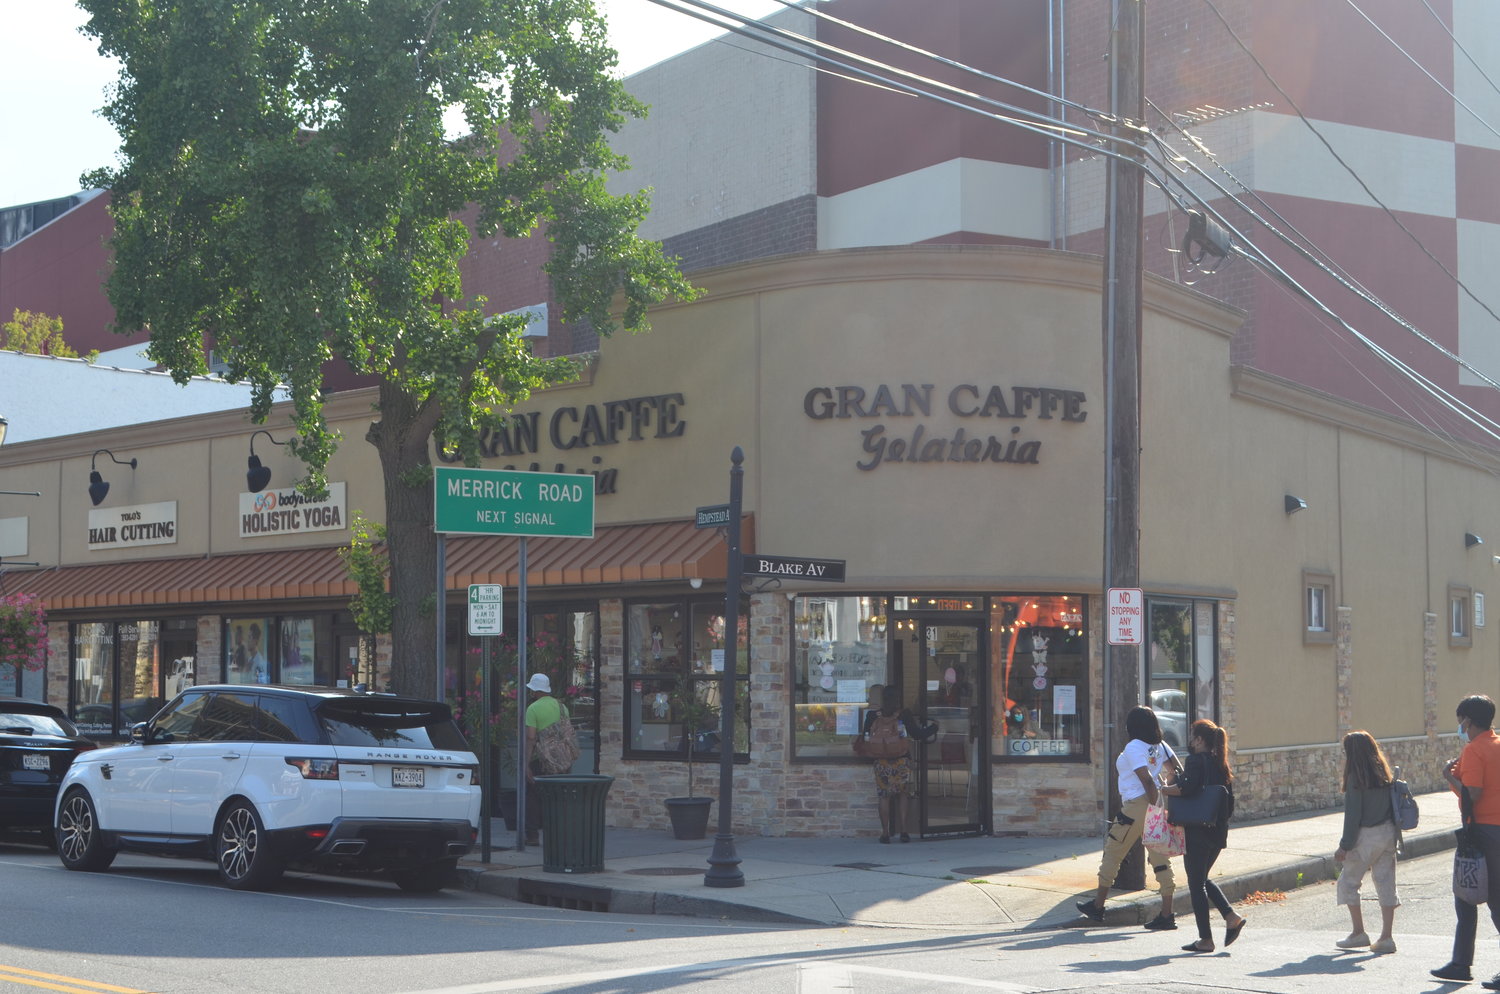 The gran caffe gelateria was named in the U.S. attorney’s indictment as an alleged base of operation for a mafia-run gambling ring.